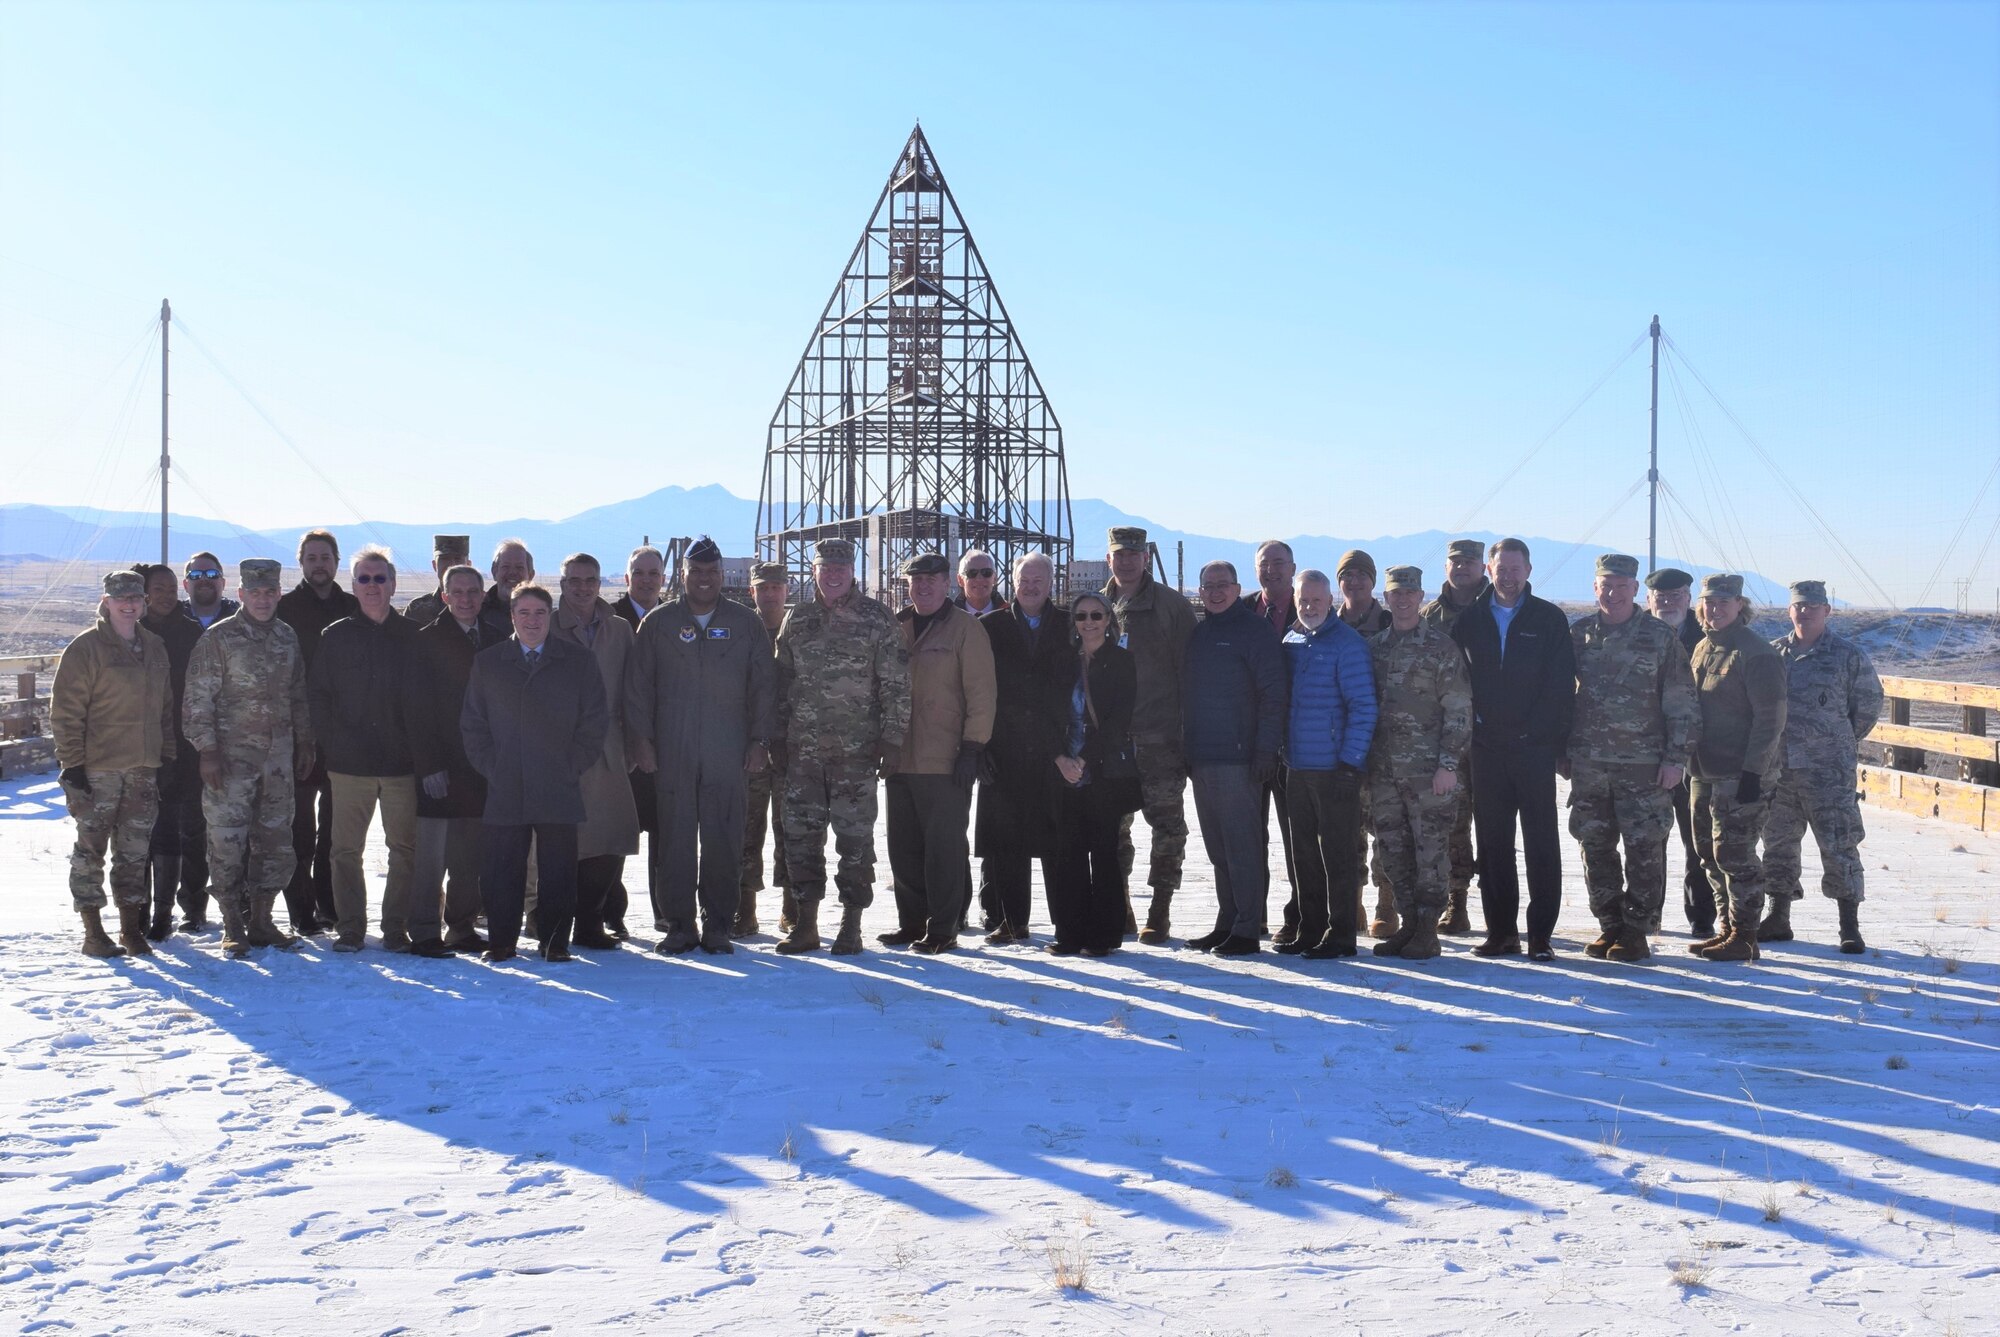 The Air Force Nuclear Issues Resolution and Integration Board held its winter meeting at the center on Feb. 6, 2020, at Kirtland AFB, New Mexico. While there, board members stopped for a photo in front of the Kirtland AFB Trestle Facility. A landmark of the Cold War, it was built in the 1970s to test the effects of an electromagnetic pulse on aircraft and is considered one of the largest all-wood structures in the world, right down to its bolts. (Air Force photo by Capt. Mike Ford).